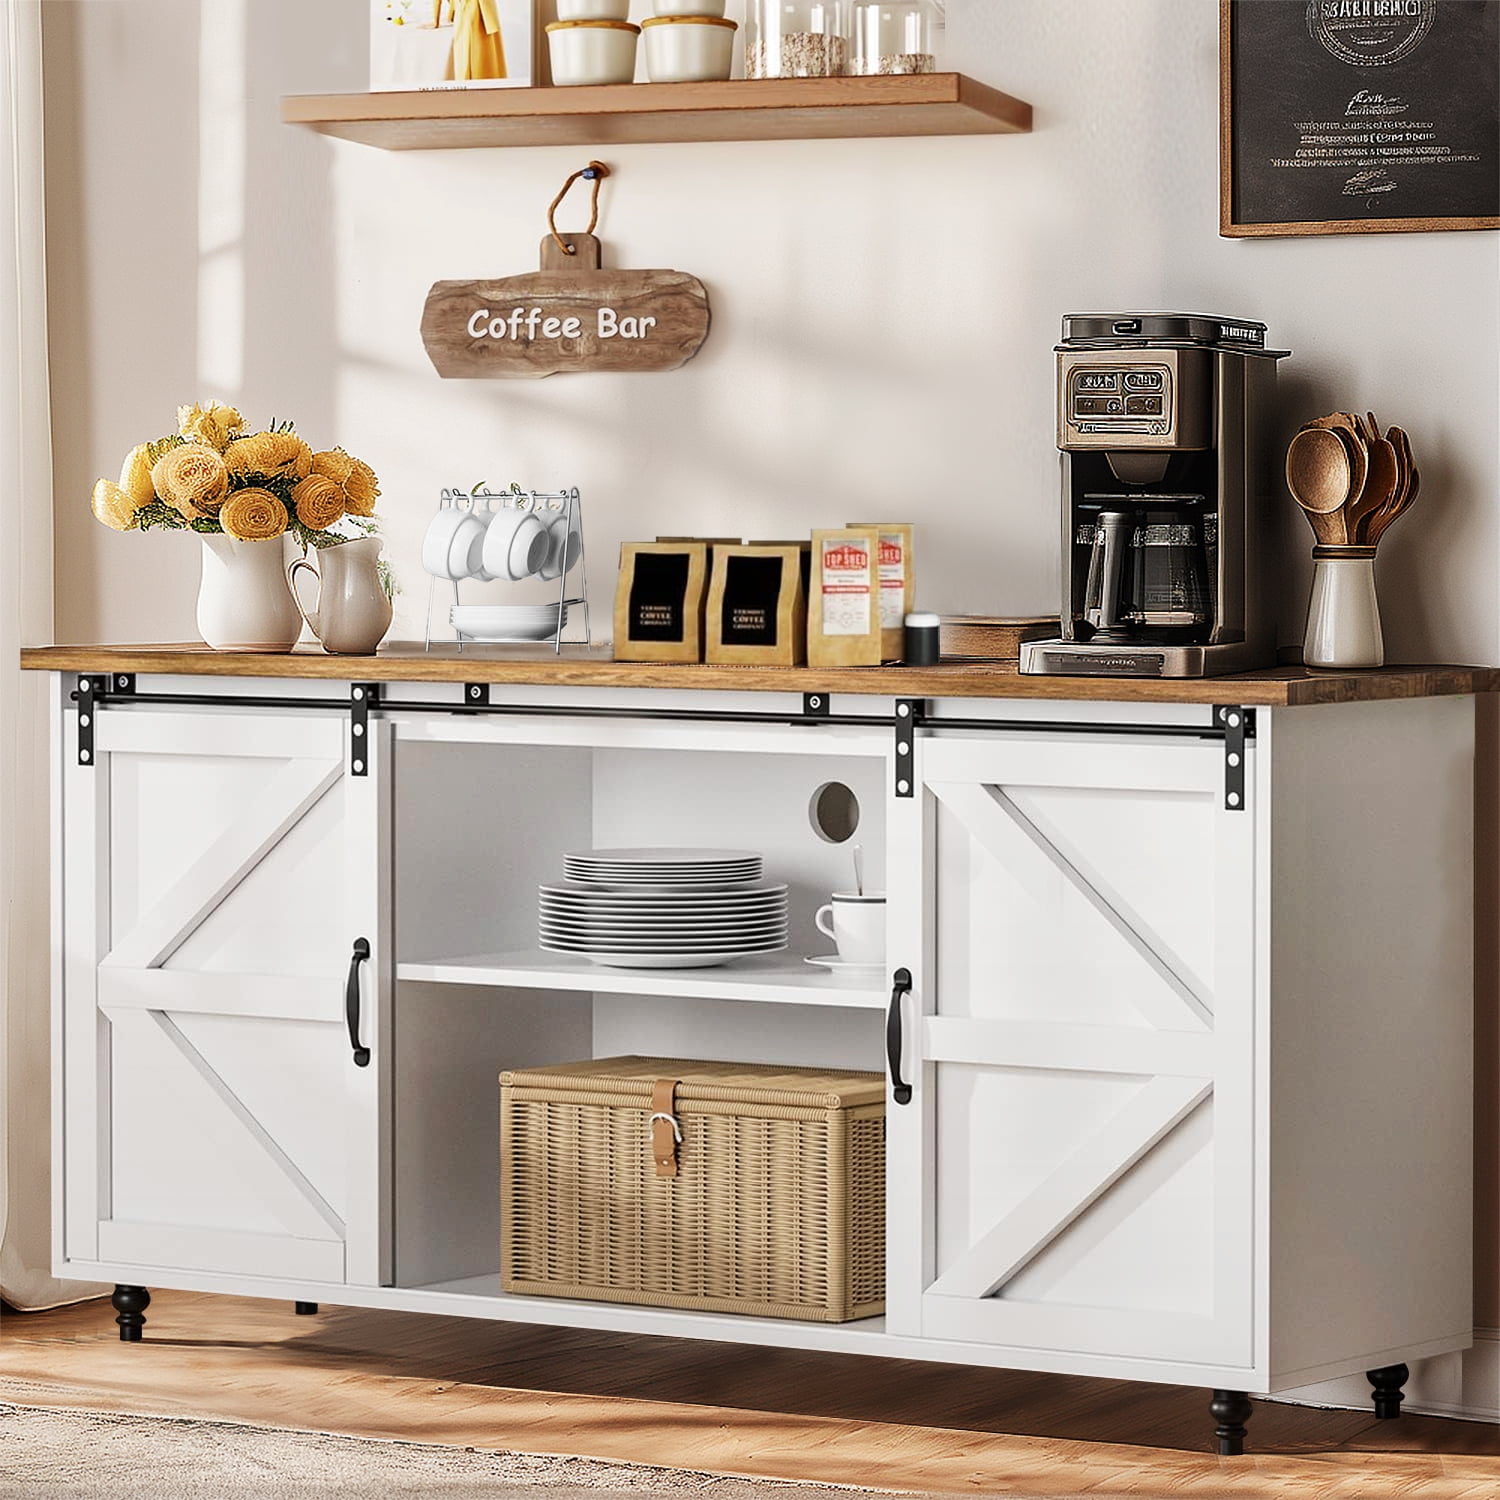 A Peek at Our New Coffee Station Cabinet with Pocket Doors! - The